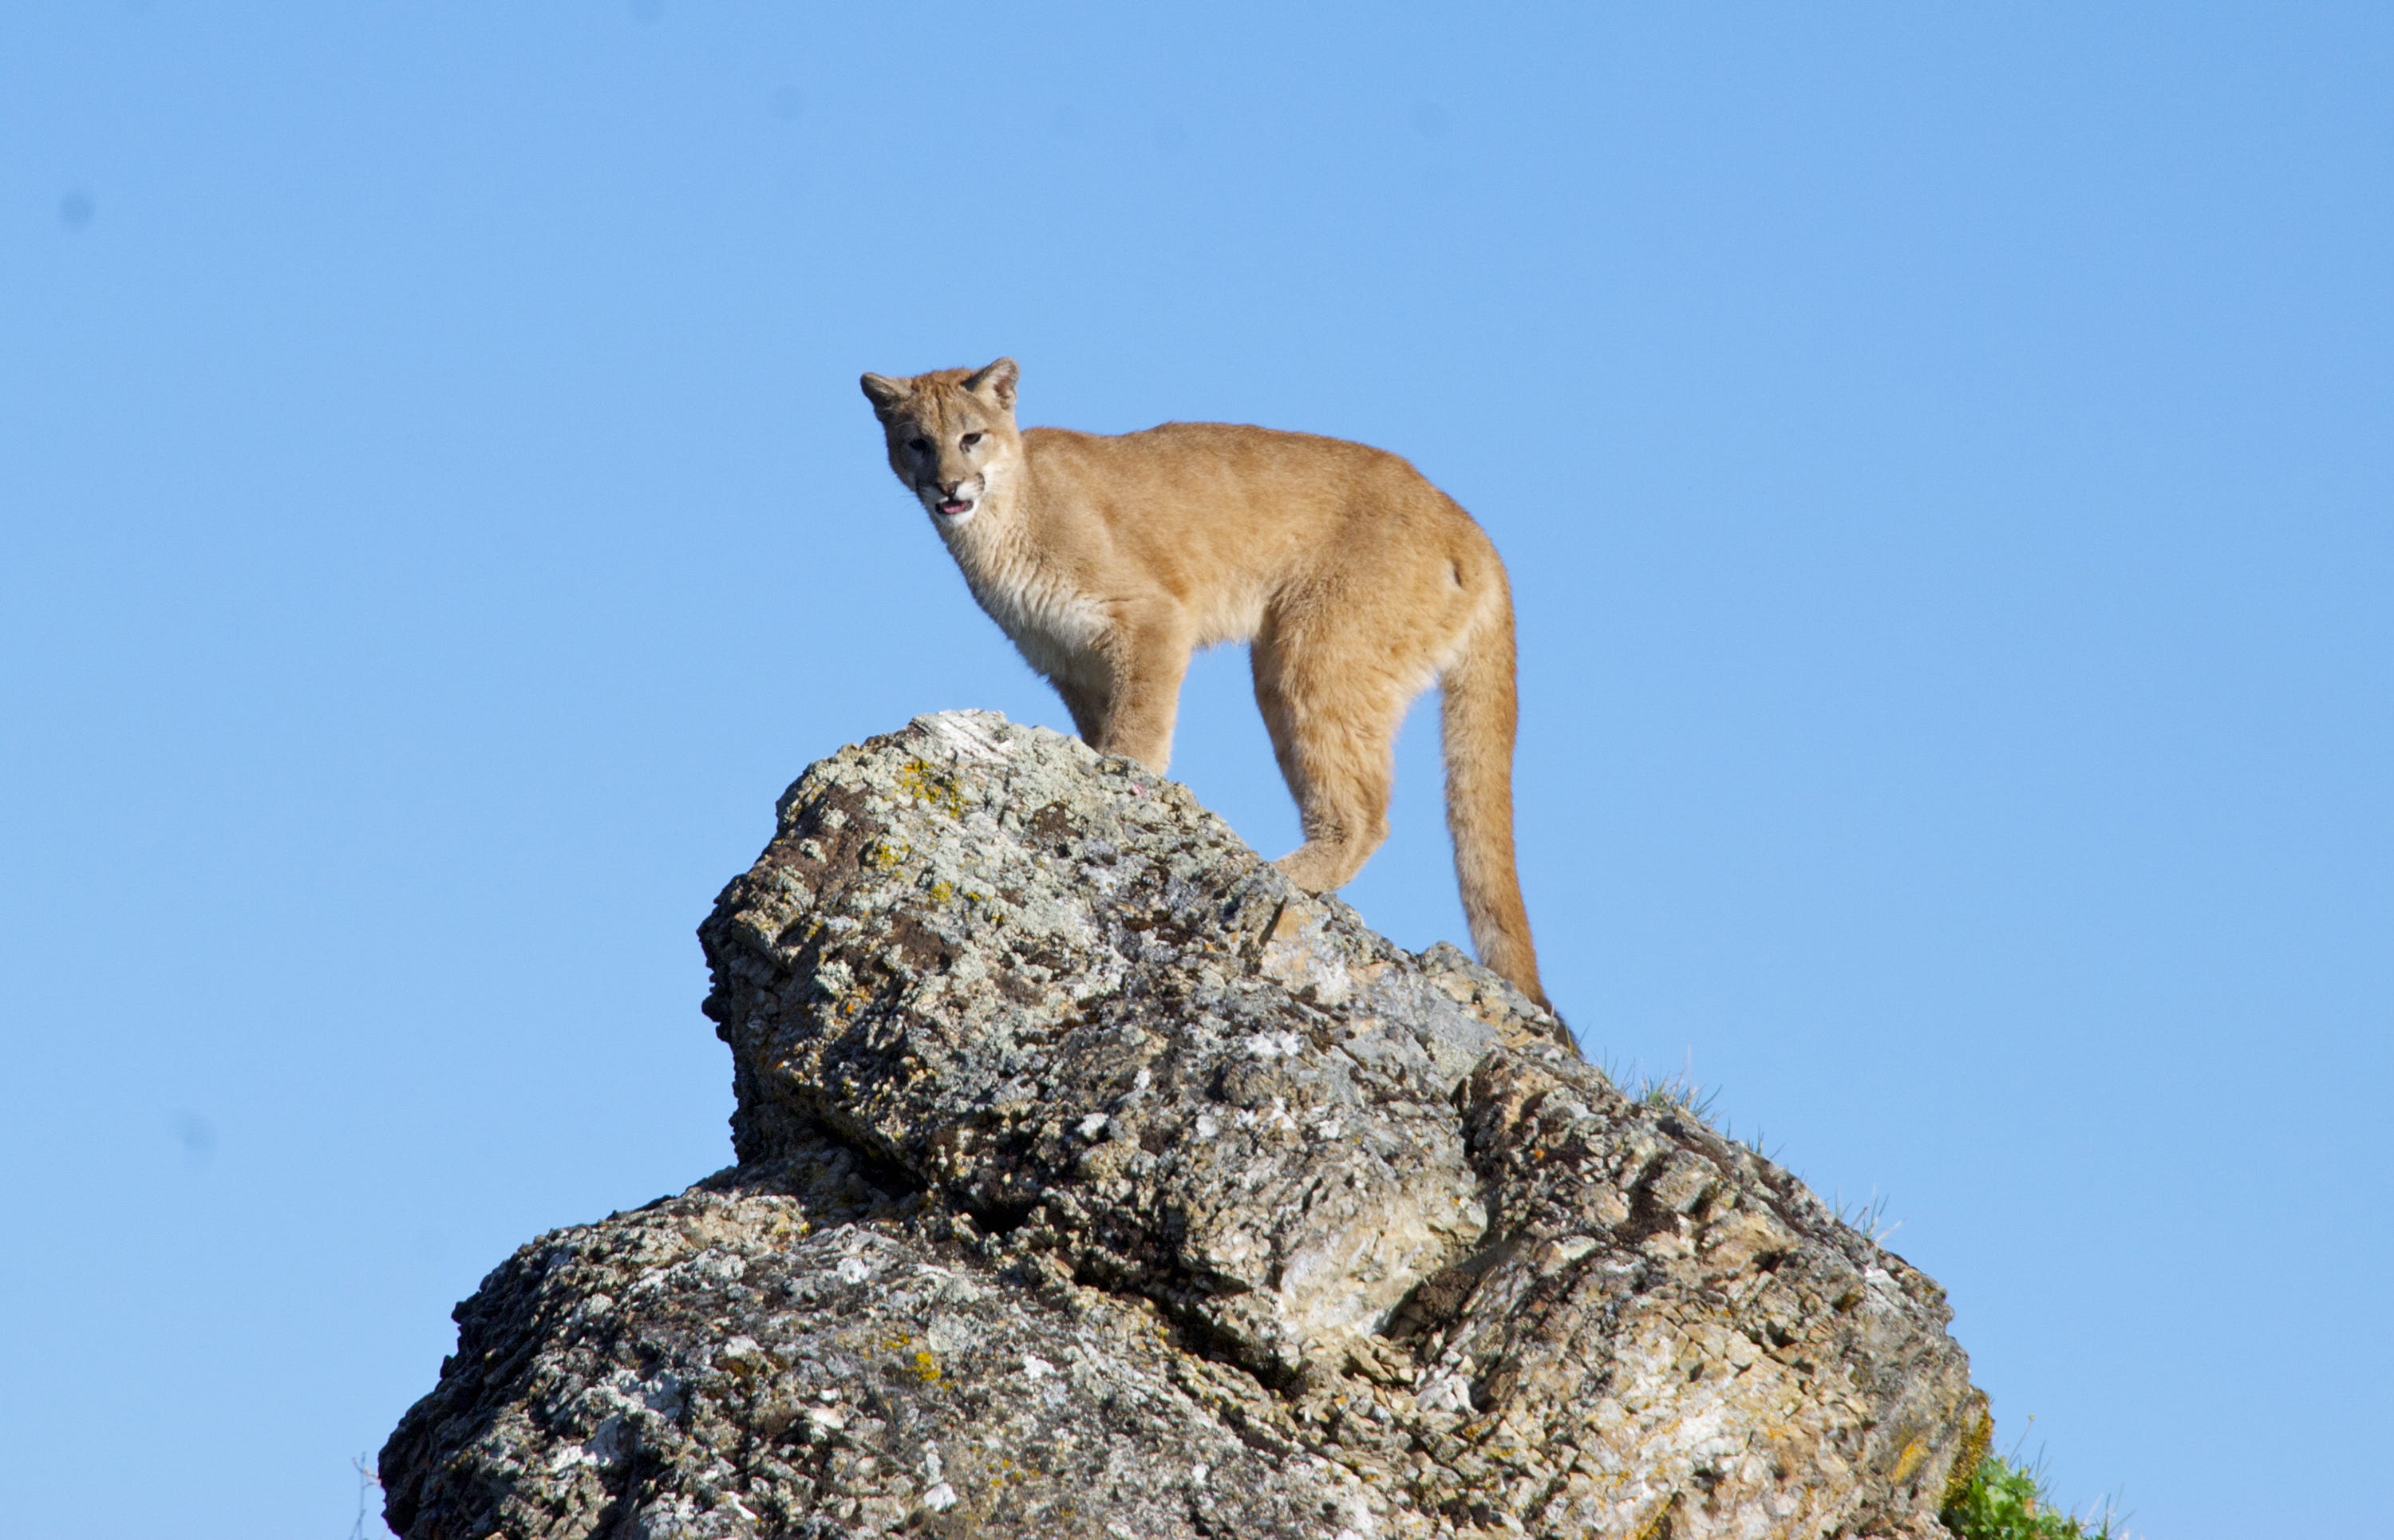 another name for a mountain lion